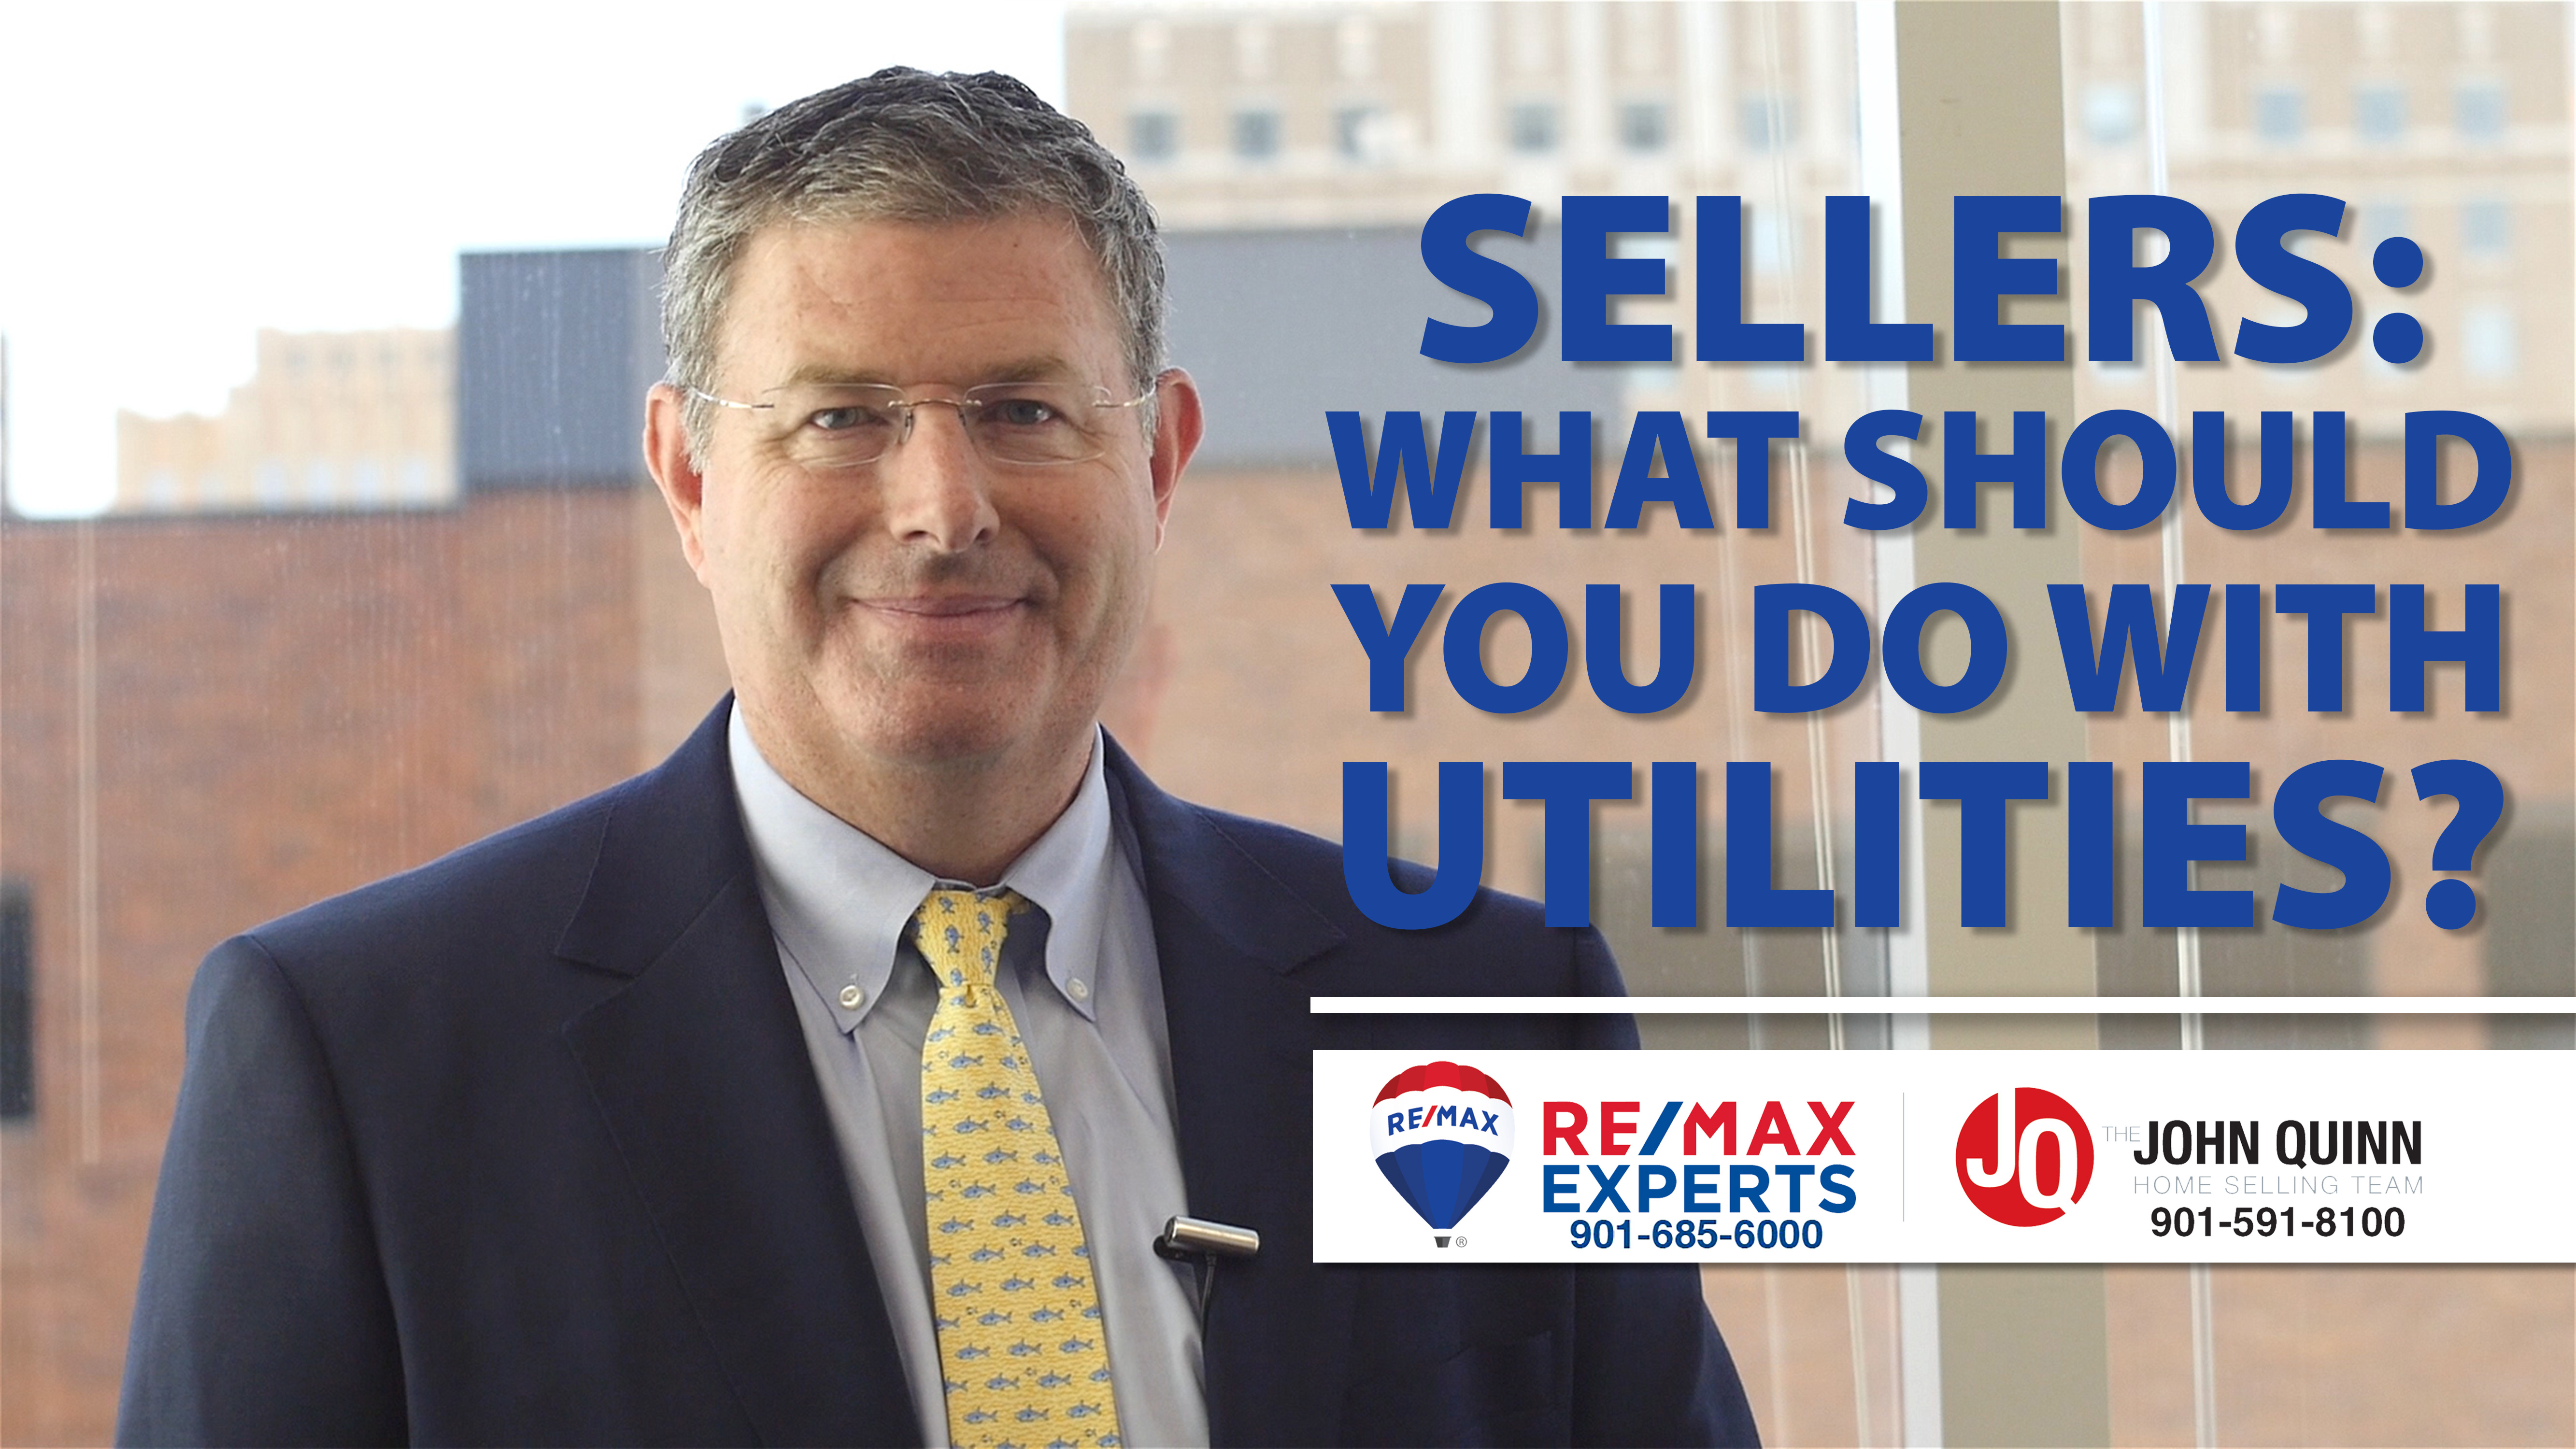 How to Handle Utilities in a Home Sale